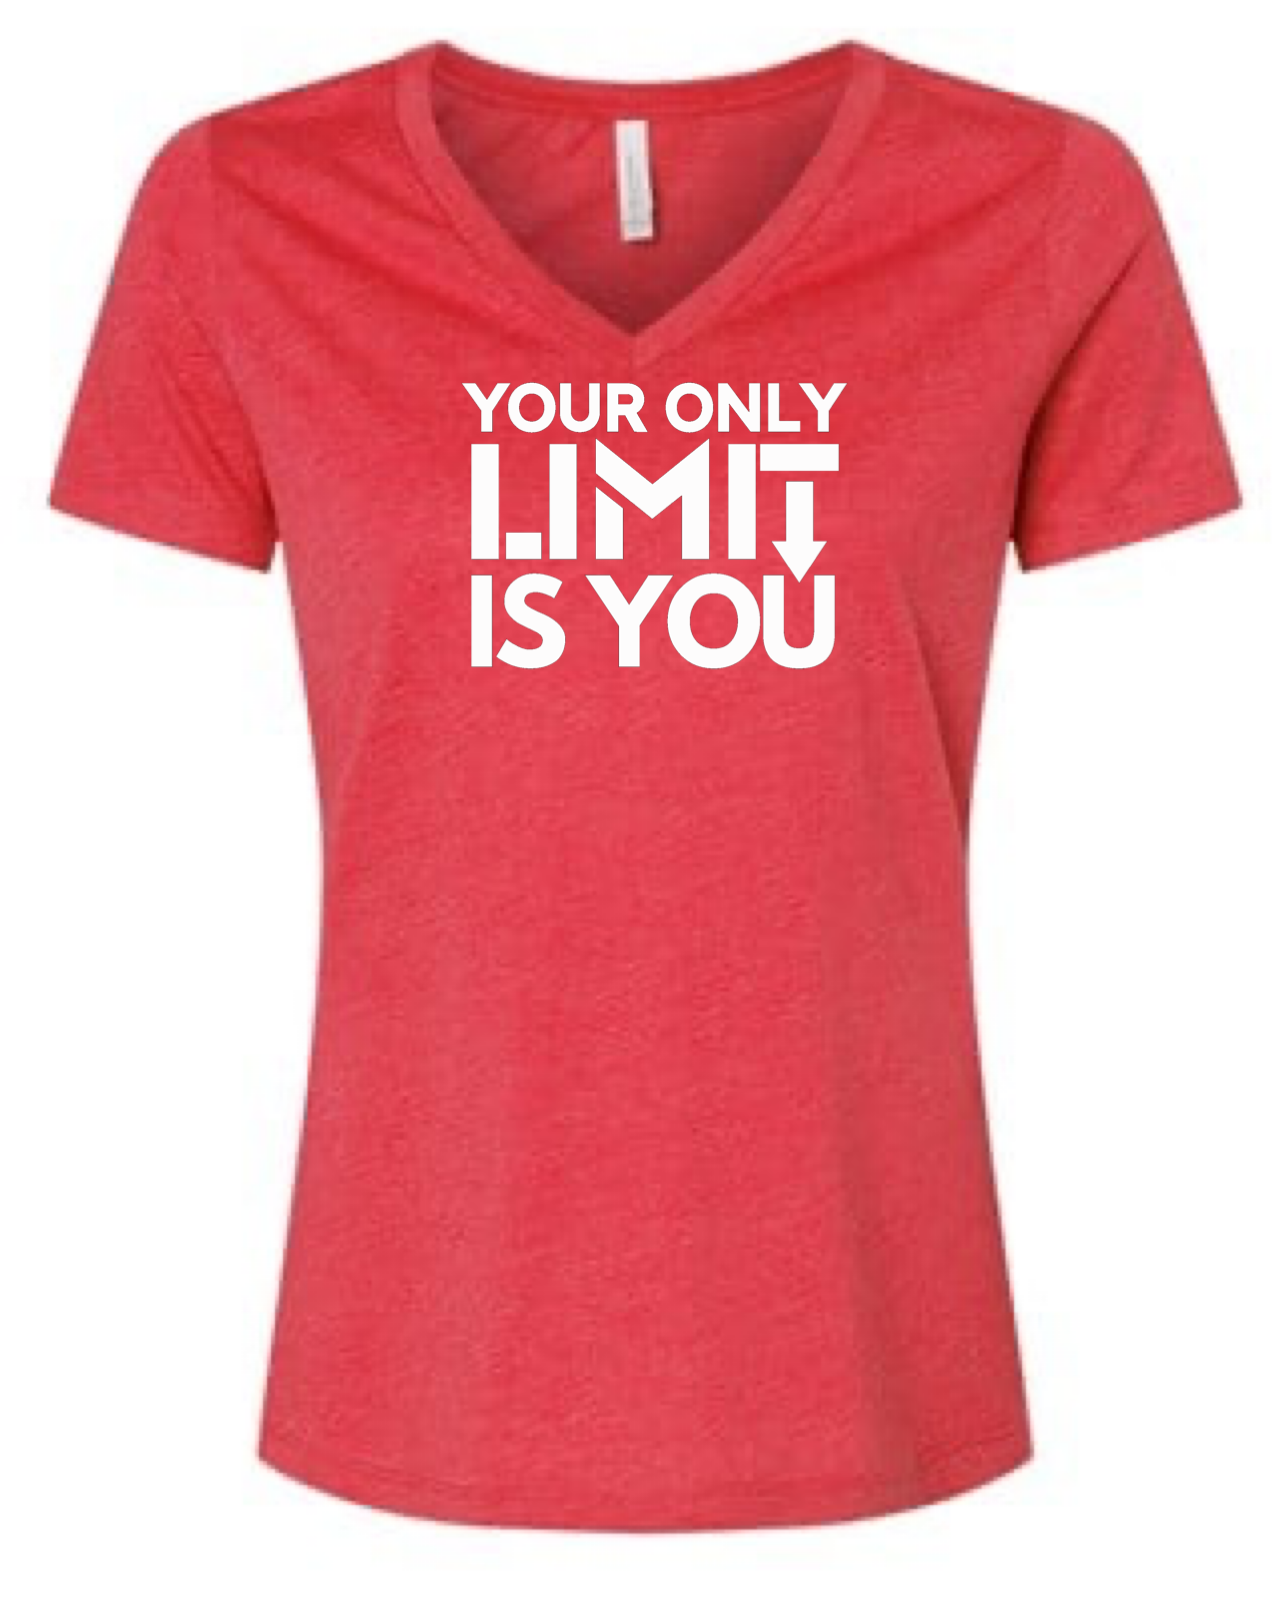 Your Only Limit is You Tri Blend V-Neck T-Shirt